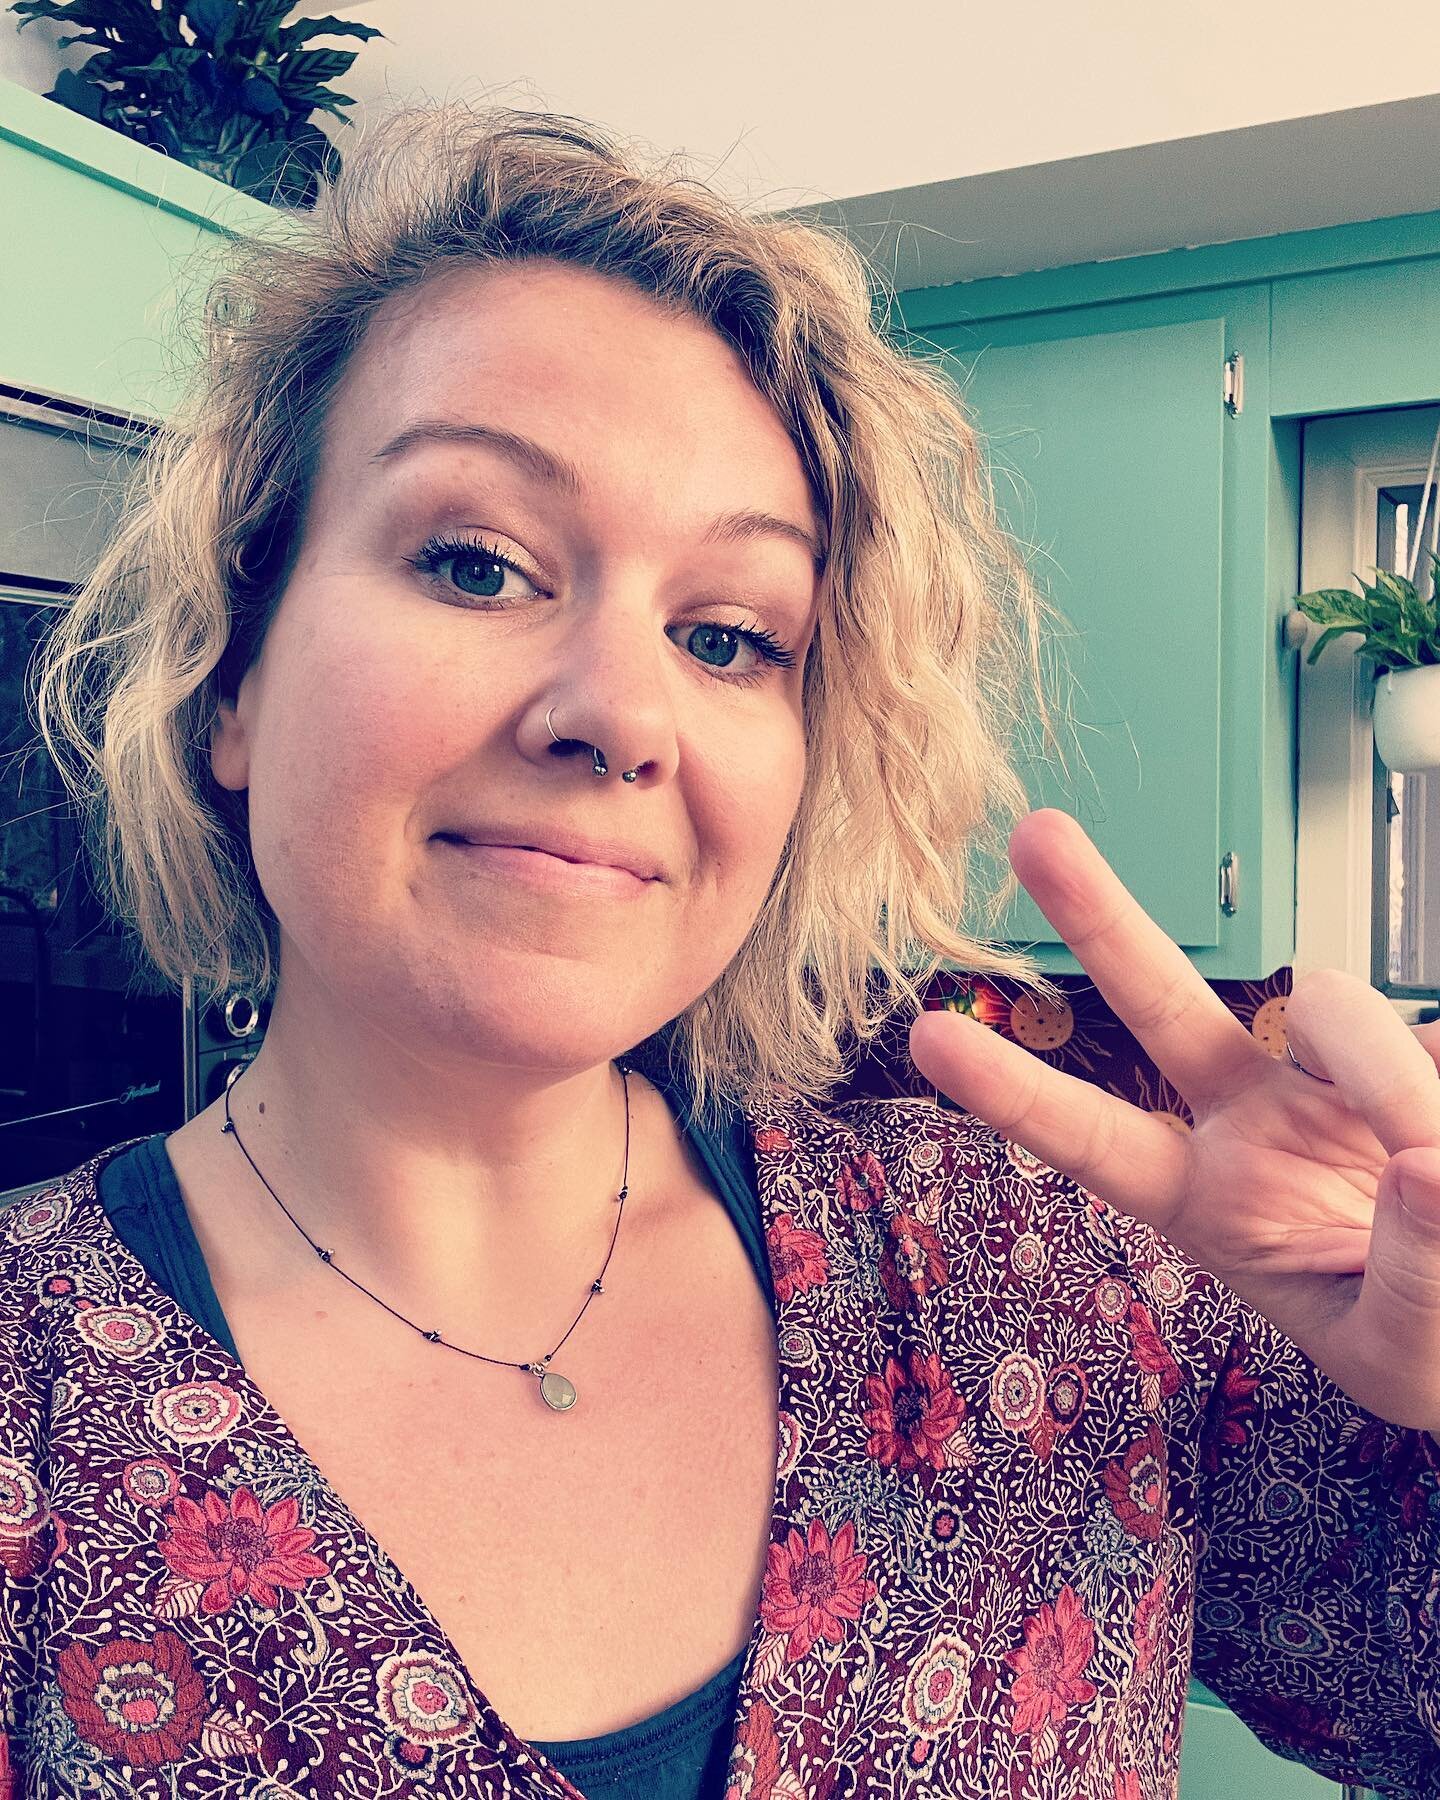 The world holds its breath&hellip; and I&rsquo;m celebrating TWO YEARS ALCOHOL FREE!! 🥳🔥🌞

I am grateful to have learned how to feel the feels without numbing out. It&rsquo;s so easy to get pulled into that undertow of temporary forgetting. Pushin